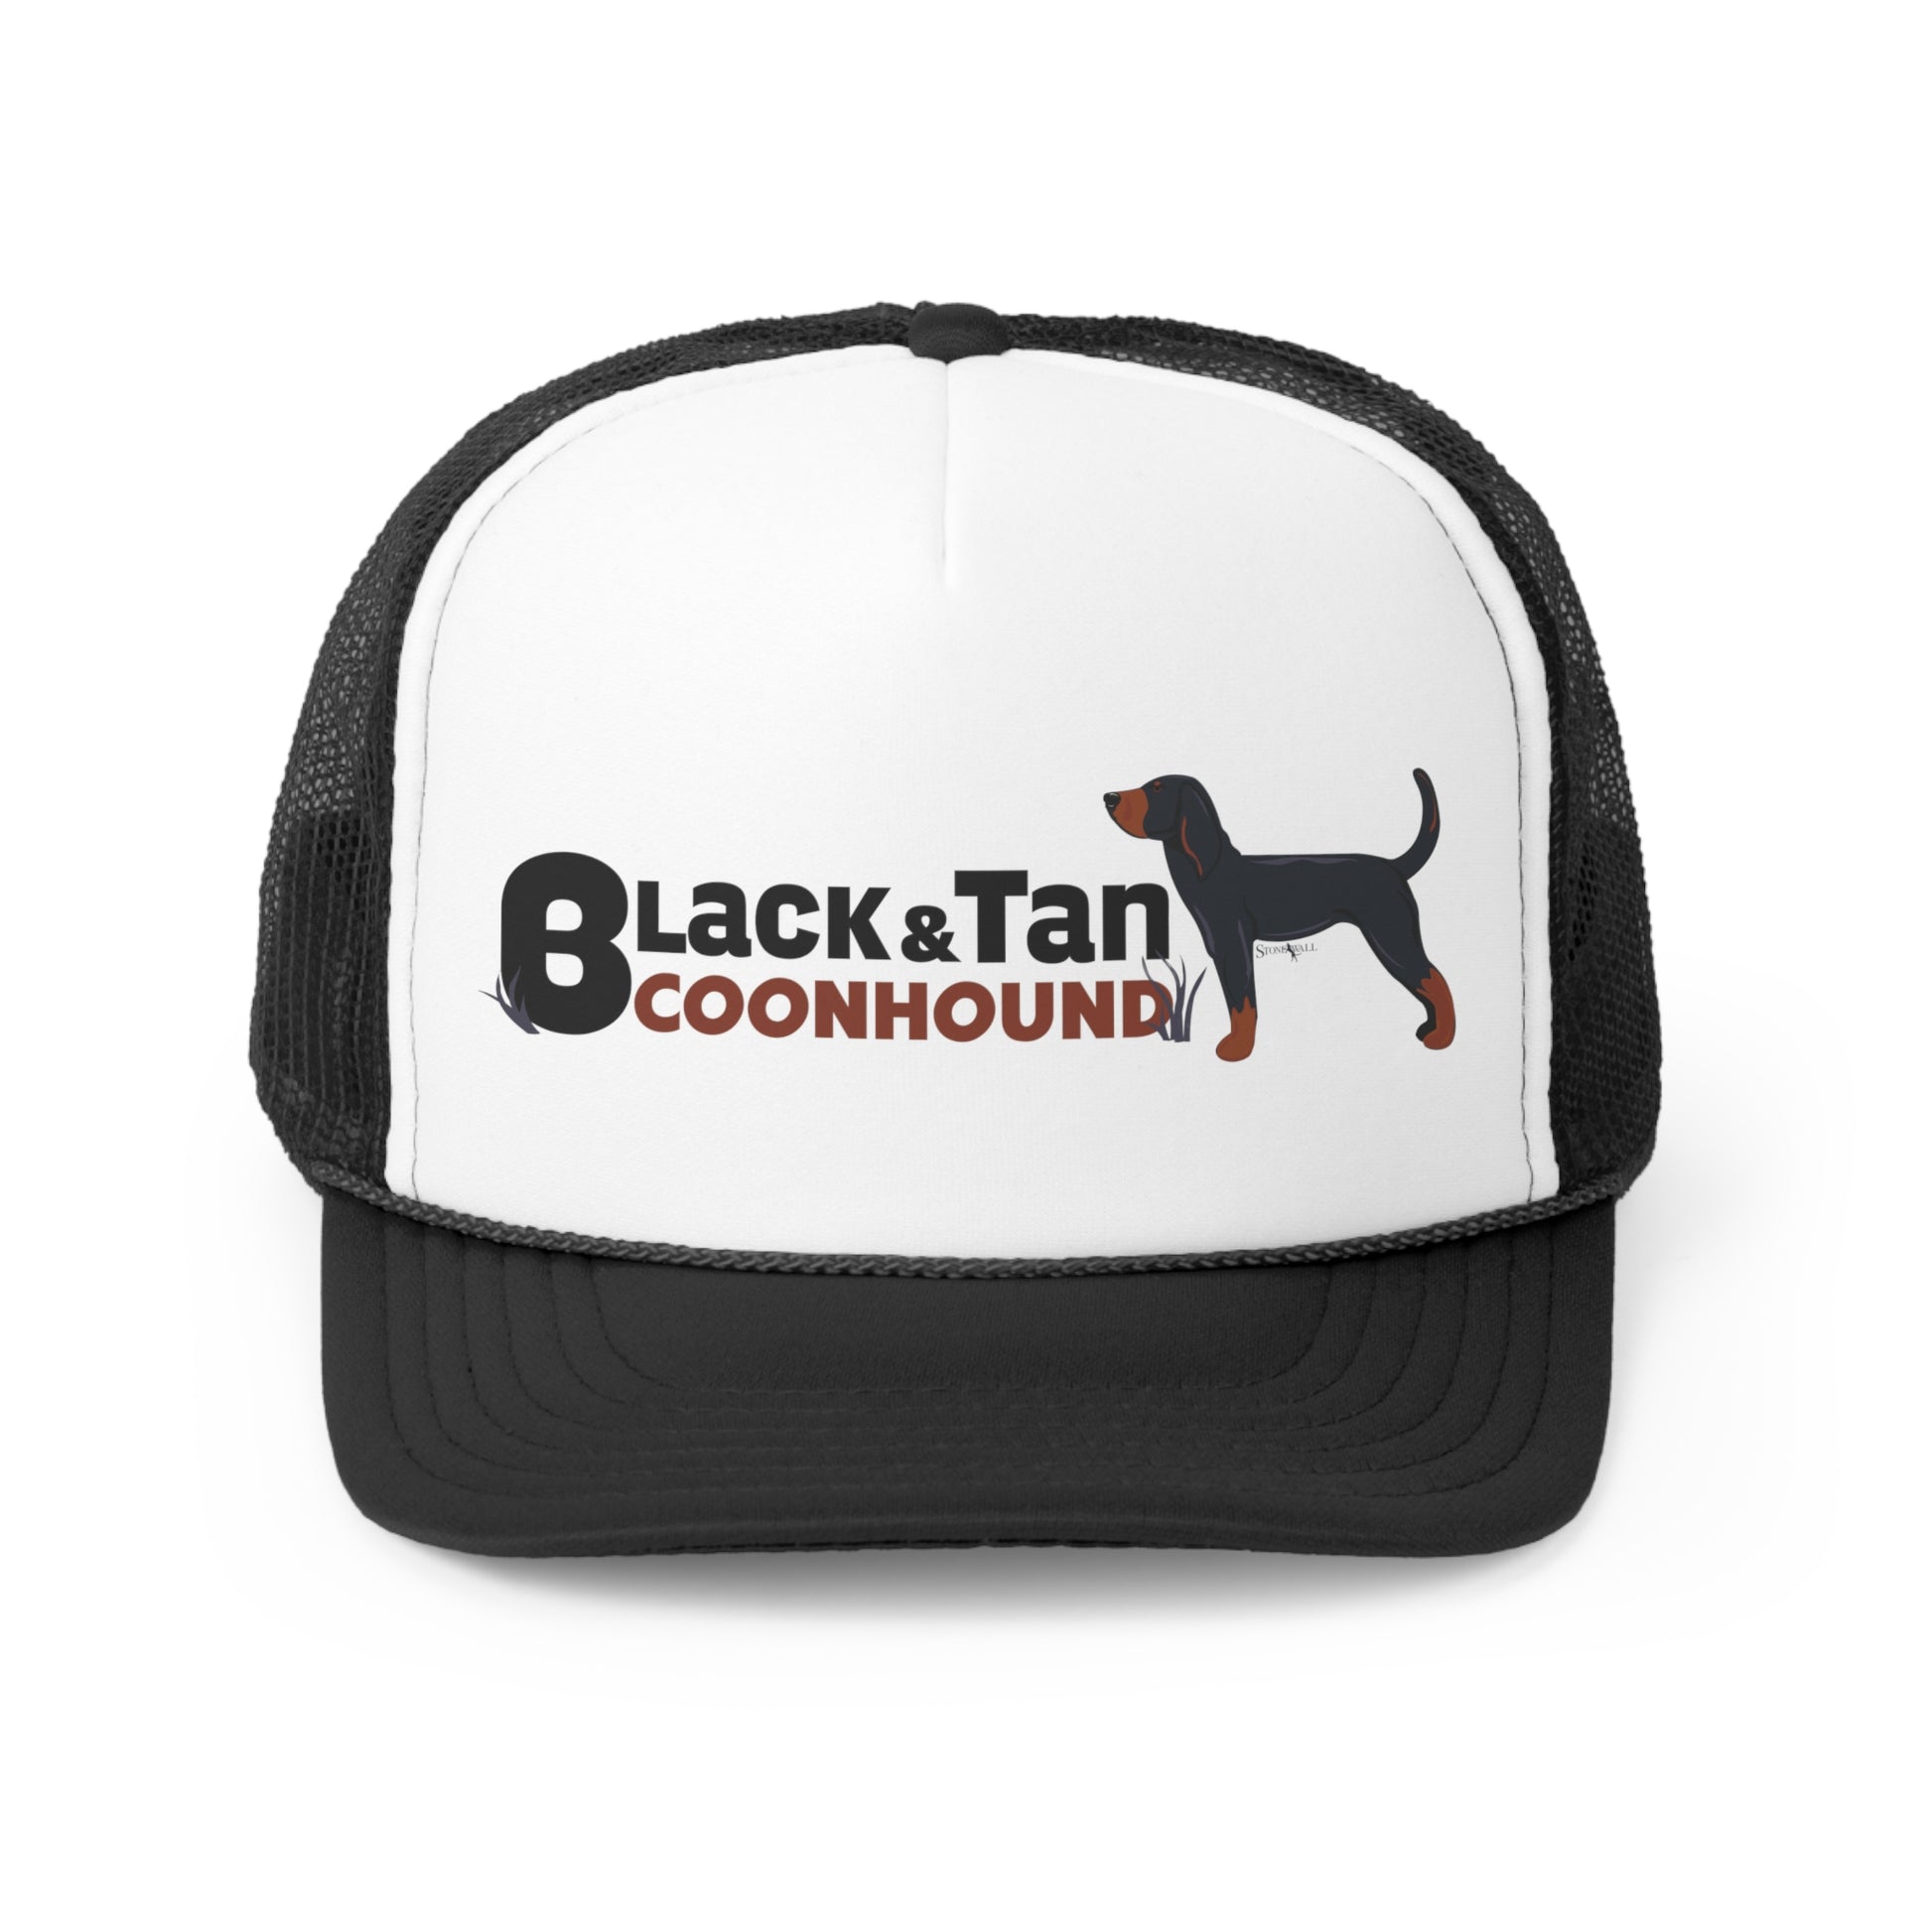 Black and Tan coonhound trucker hat